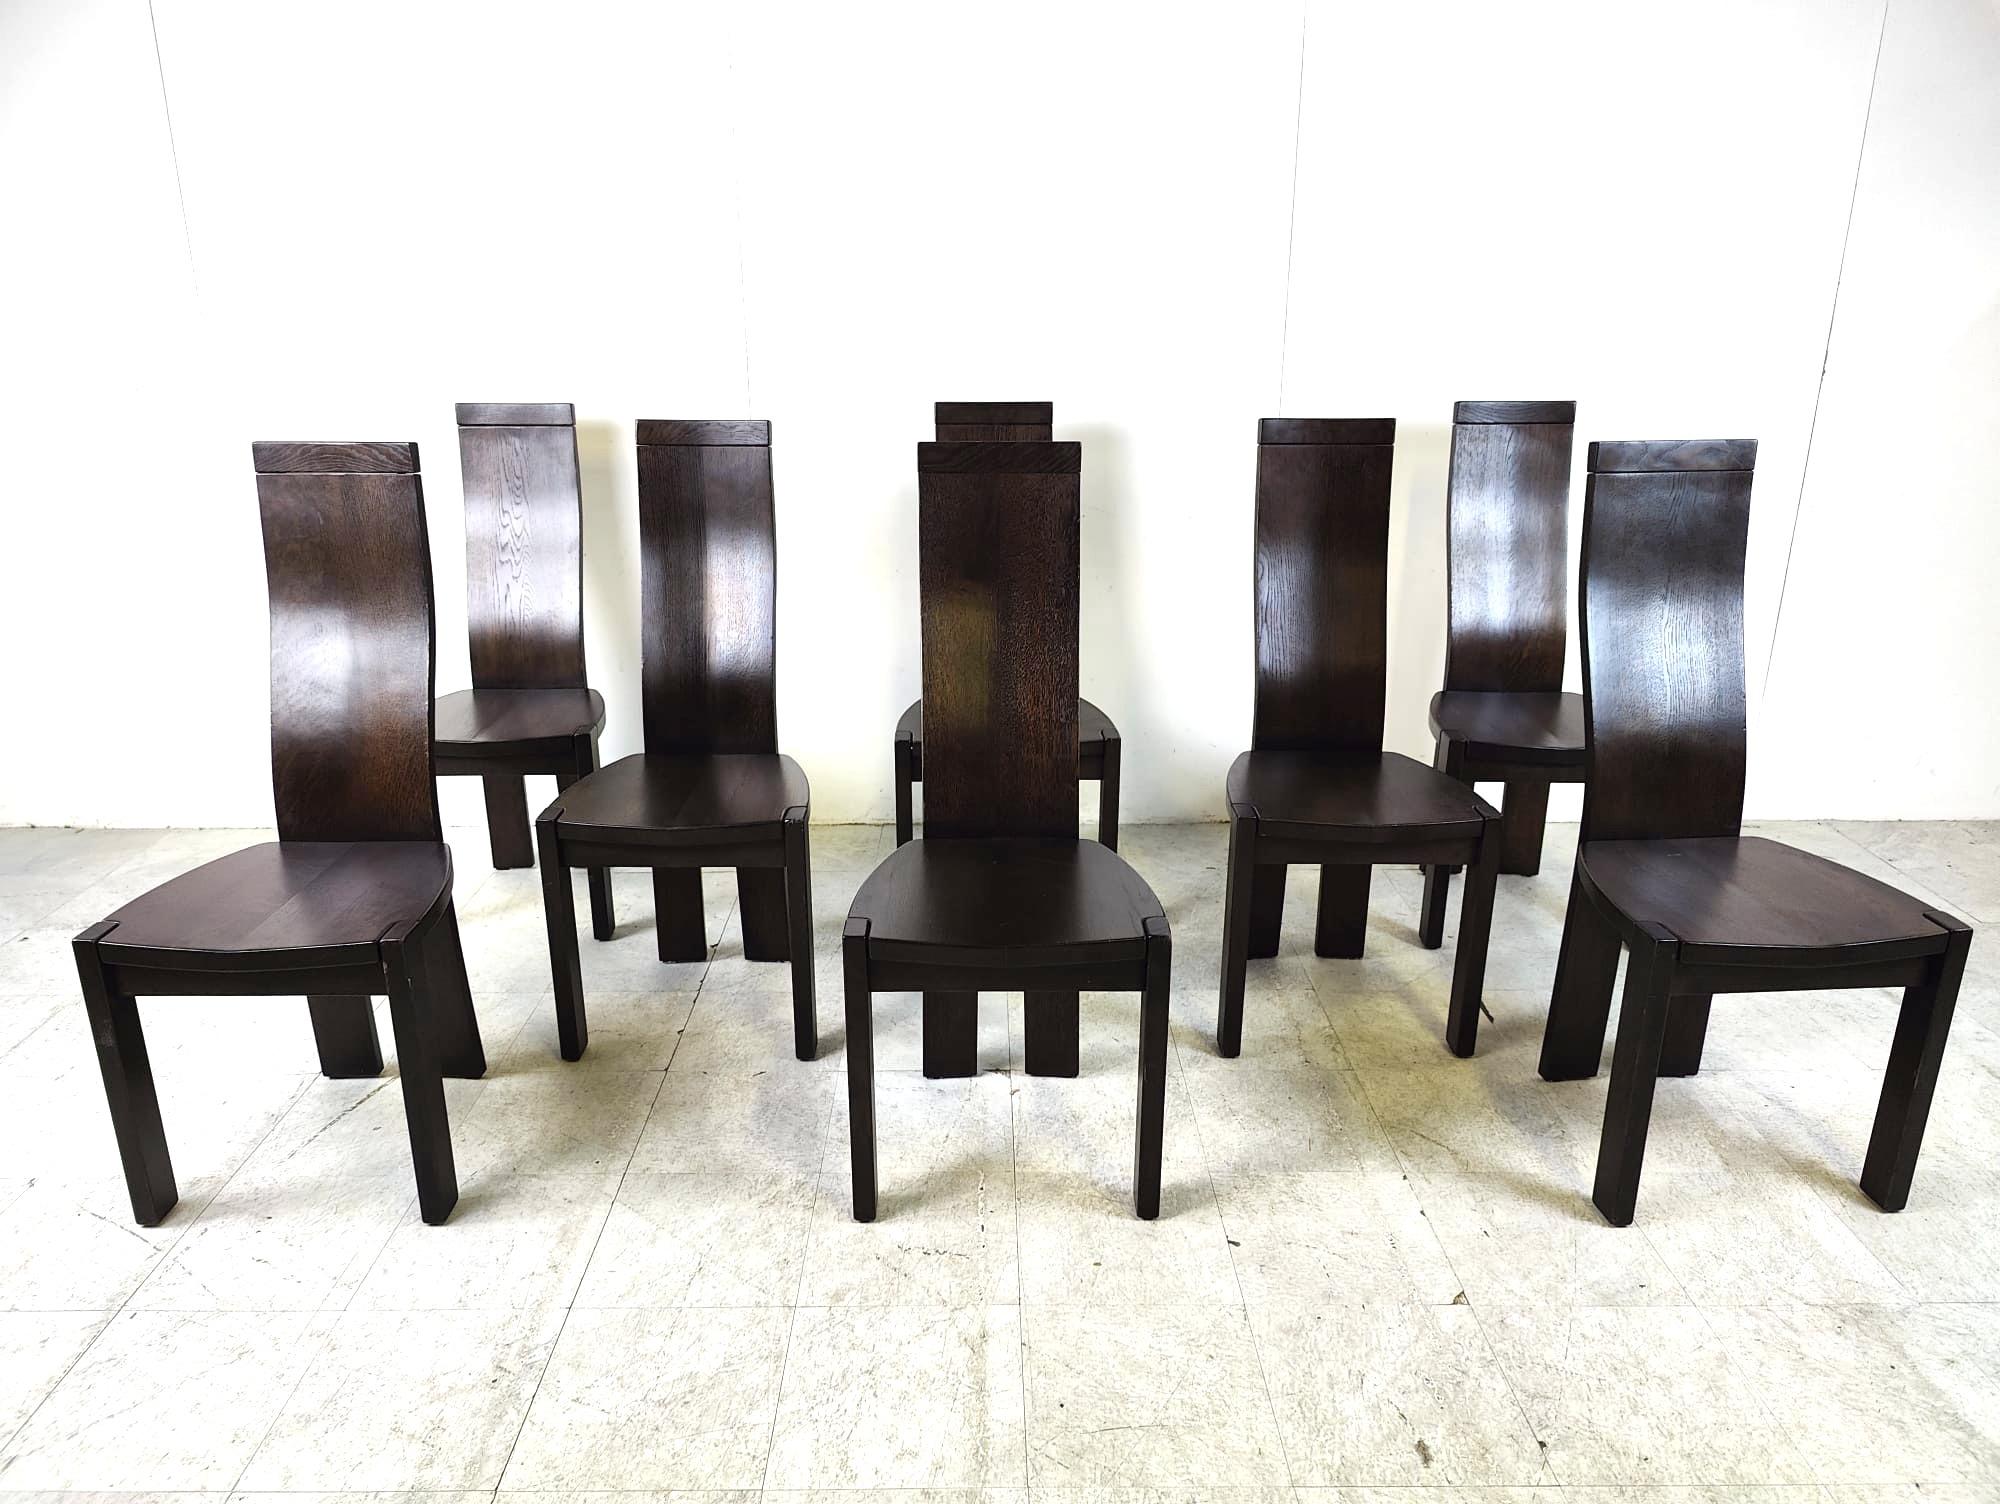 Elegant, sculptural high back dining chairs by Vanden Berghe Pauvers.

The chairs are in overal good condition

1980s - Belgium

Dimensions:
Height: 108cm/42.51